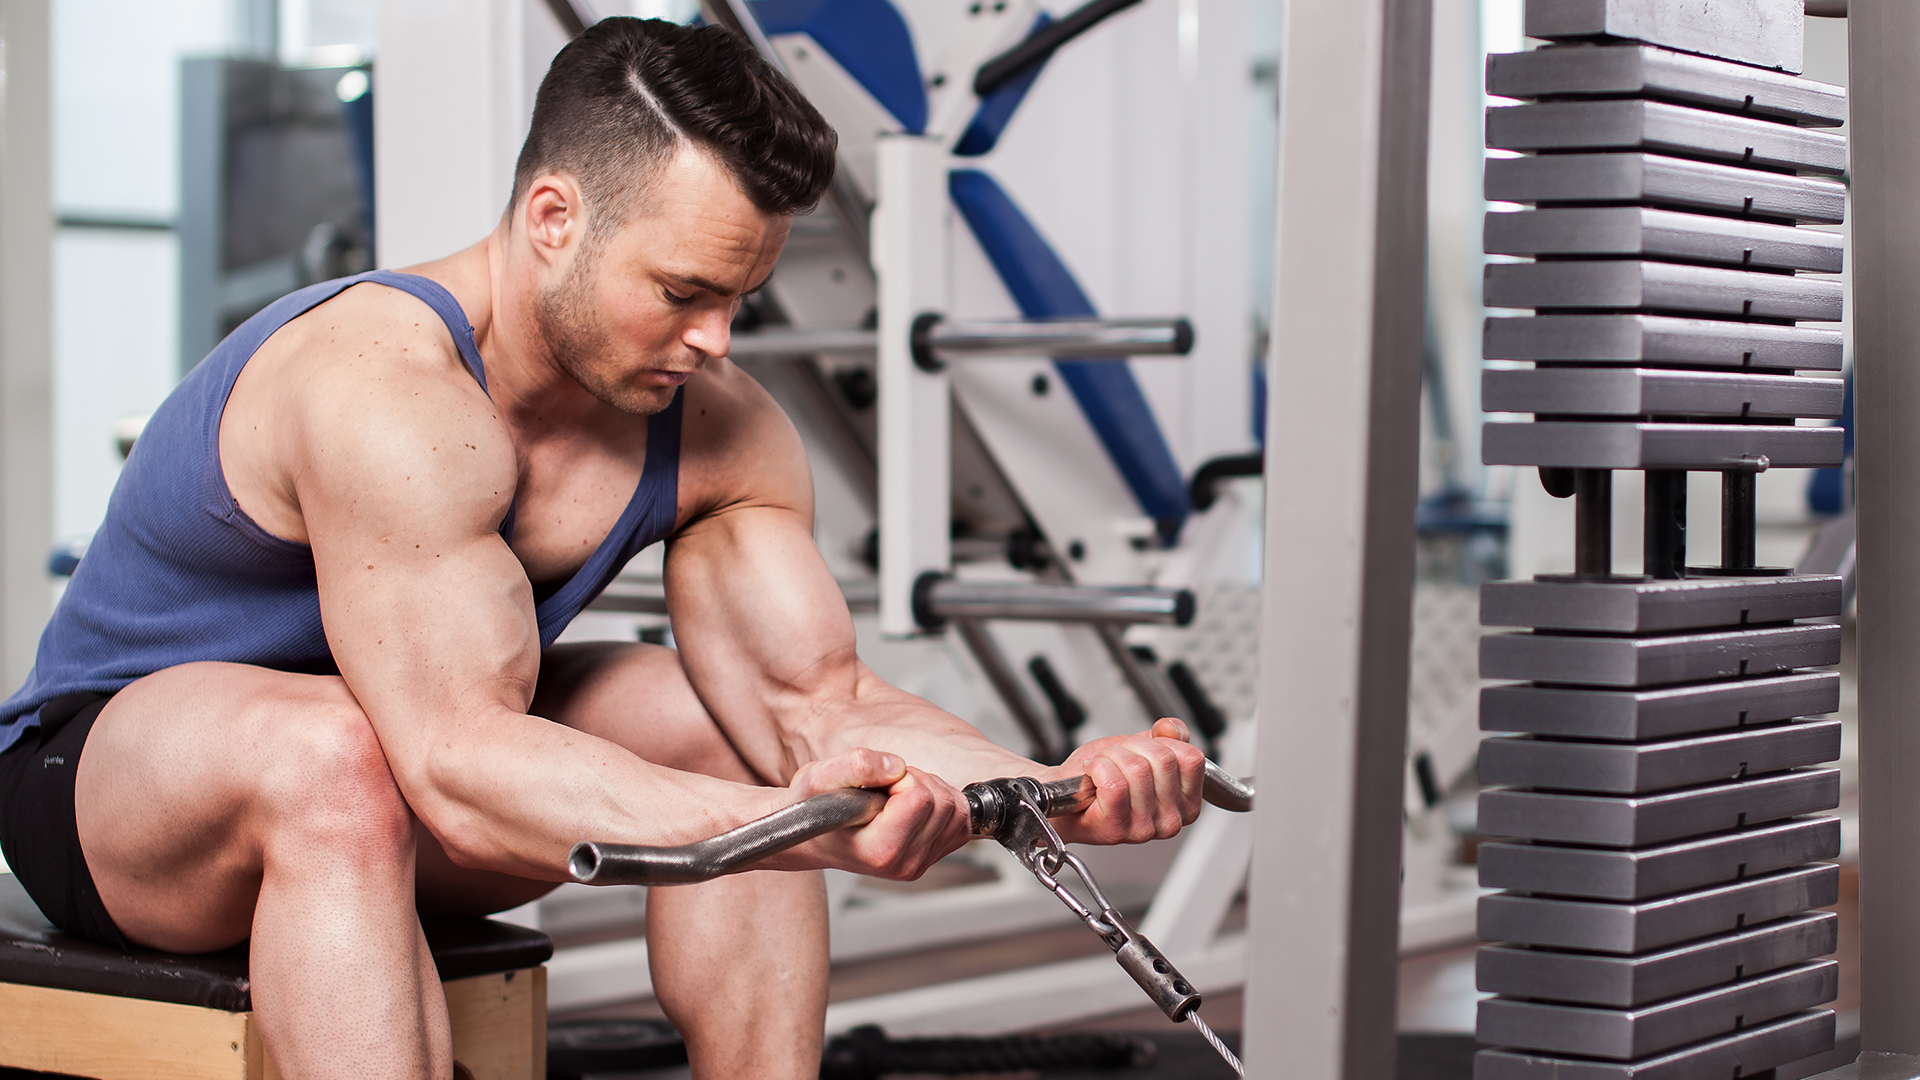 HAVING STRONG FOREARMS MAY HELP YOU LIVE LONGER, ACCORDING TO SCIENCE.